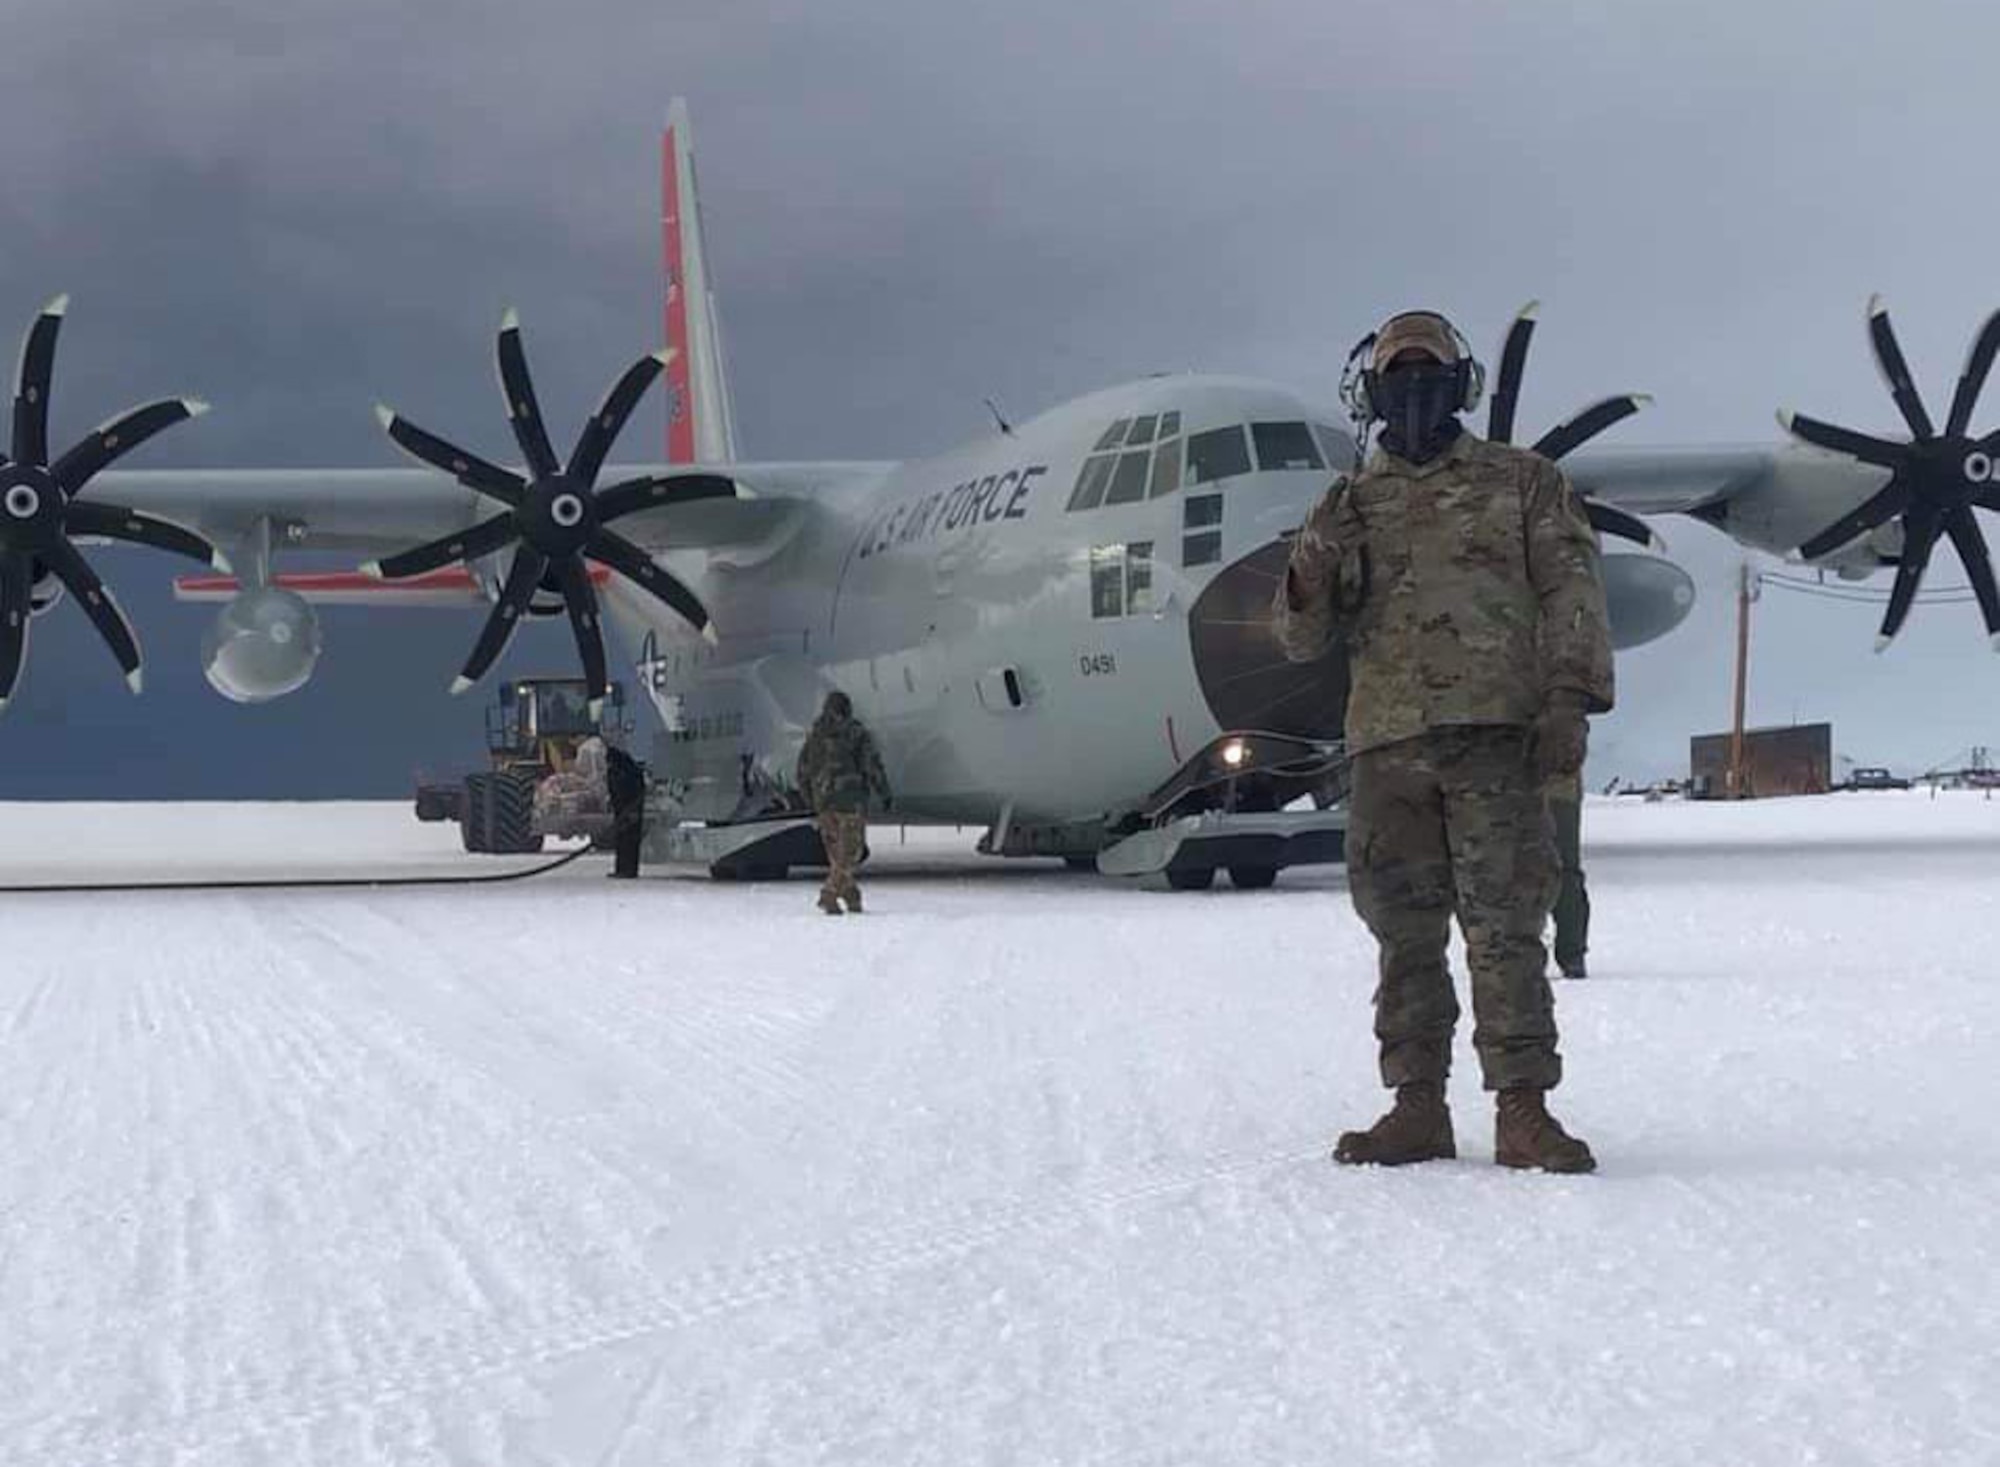 A New York Air National Guard Airman on duty in Antarctica on Feb. 5, 2021, during a mission conducted in support of the National  Science Foundation by the 109th Airlift Wing. The 109th Airlift Wing deployed three LC-130  "Skibird" aircraft and 50 Airmen to Christchurch, New Zealand, to run missions as required to Antarctica as part of the Department of Defense's Operation Deep Freeze.